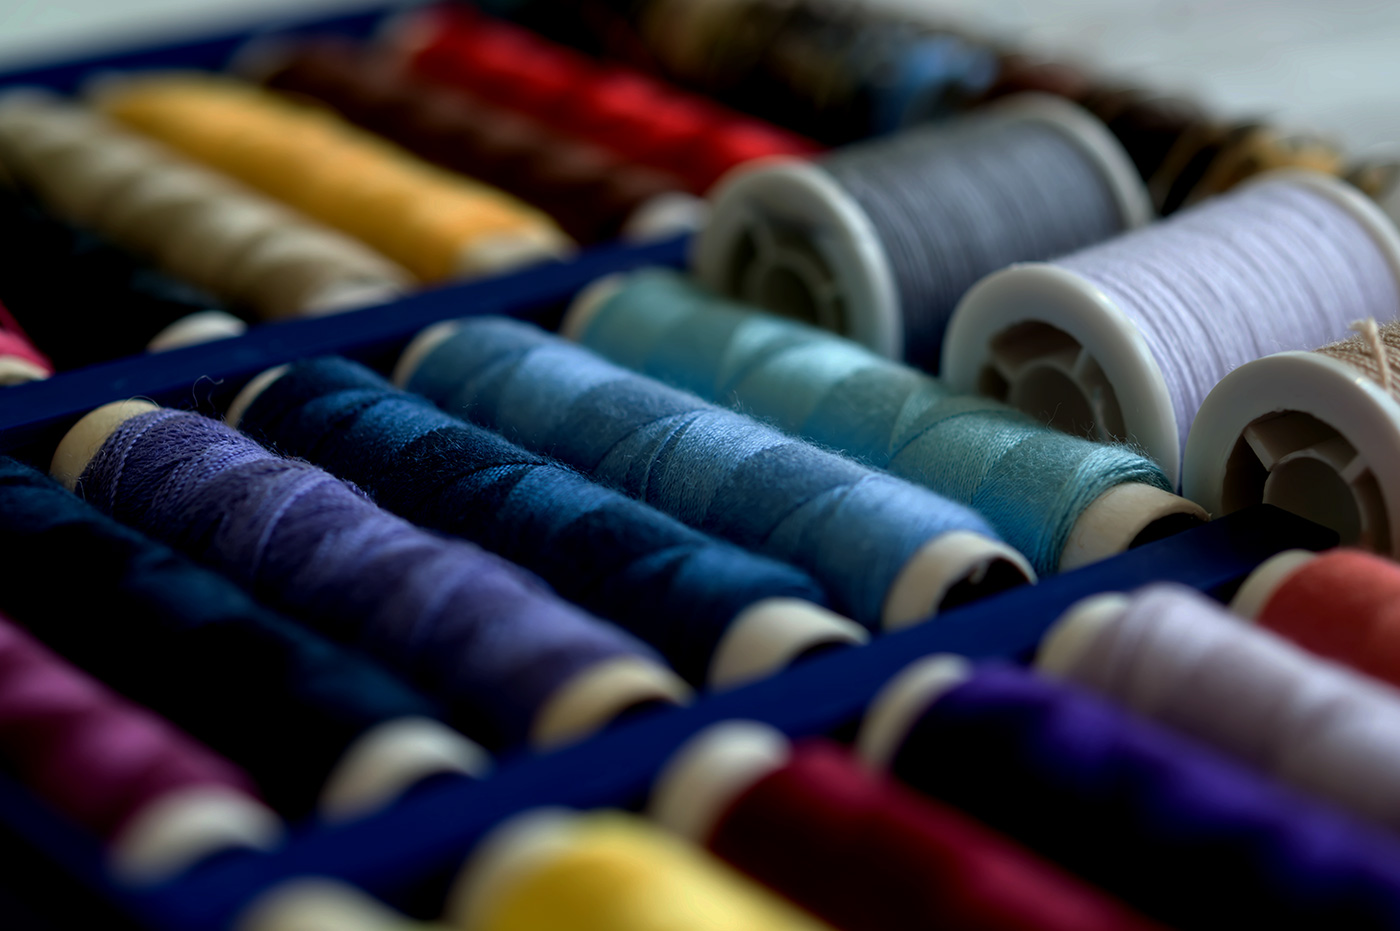 Spools of thread in various colors.